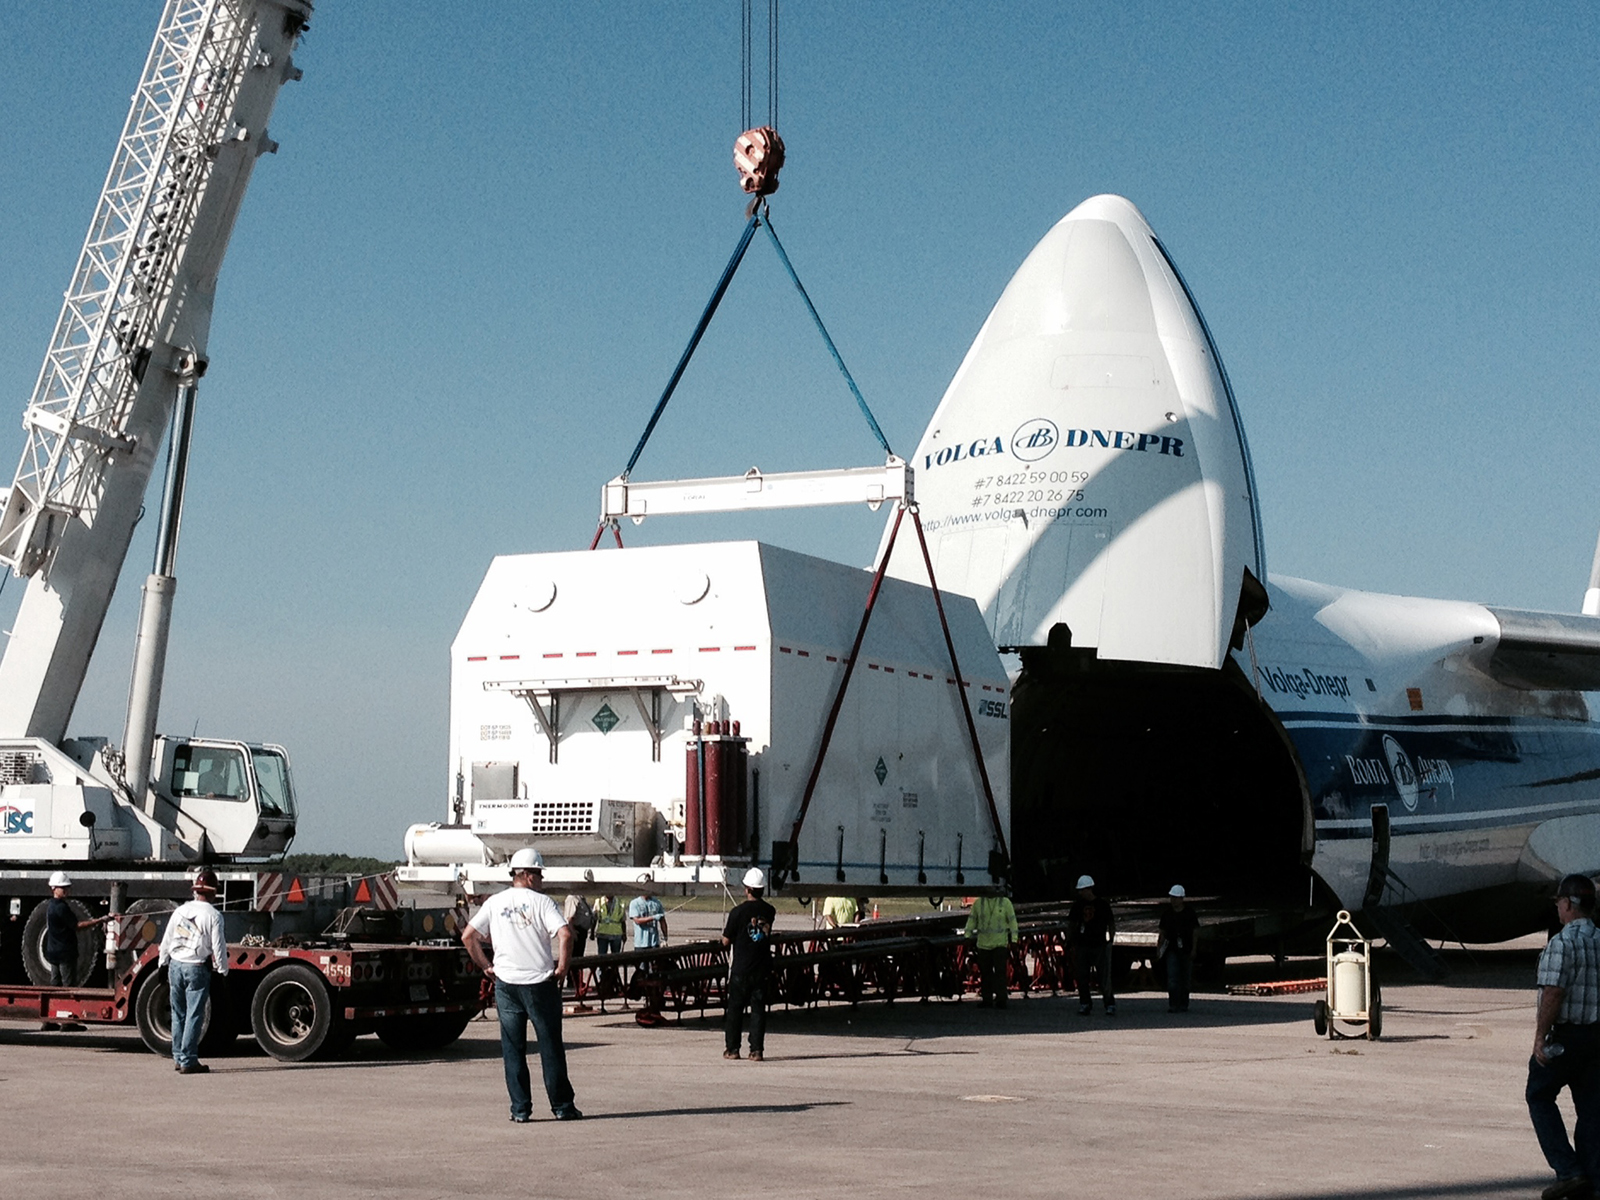 AsiaSat 6 unloaded from the Antonov at Cape Canaveral